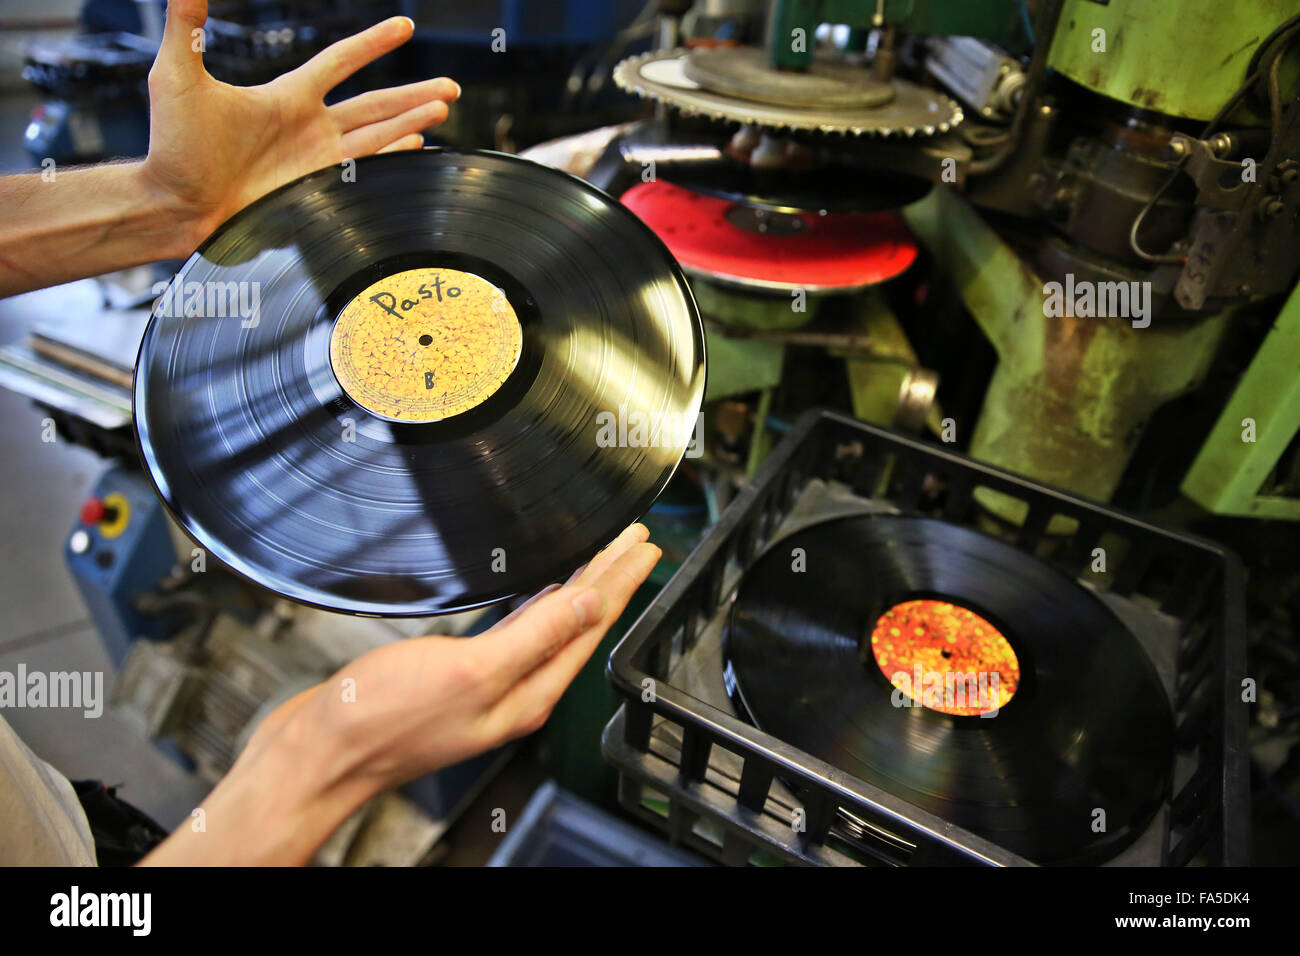 Stollberg, Germany. 3rd Dec, 2015. An employee of Celebrate Records checks a freshly pressed record at the pressing plant in Stollberg, Germany, 3 December 2015. According to the Bundesverband Musikindustrie (music industry association), the LP record has been making a comeback for several years. In 2014 around 1.8 million records worth 38 million euros were sold, the most since 1992. At Celebrate Records, around 40 employees produce more than 2 million records each year. Around 70 per cent are exported. PHOTO: JAN WOITAS/DPA/Alamy Live News Stock Photo